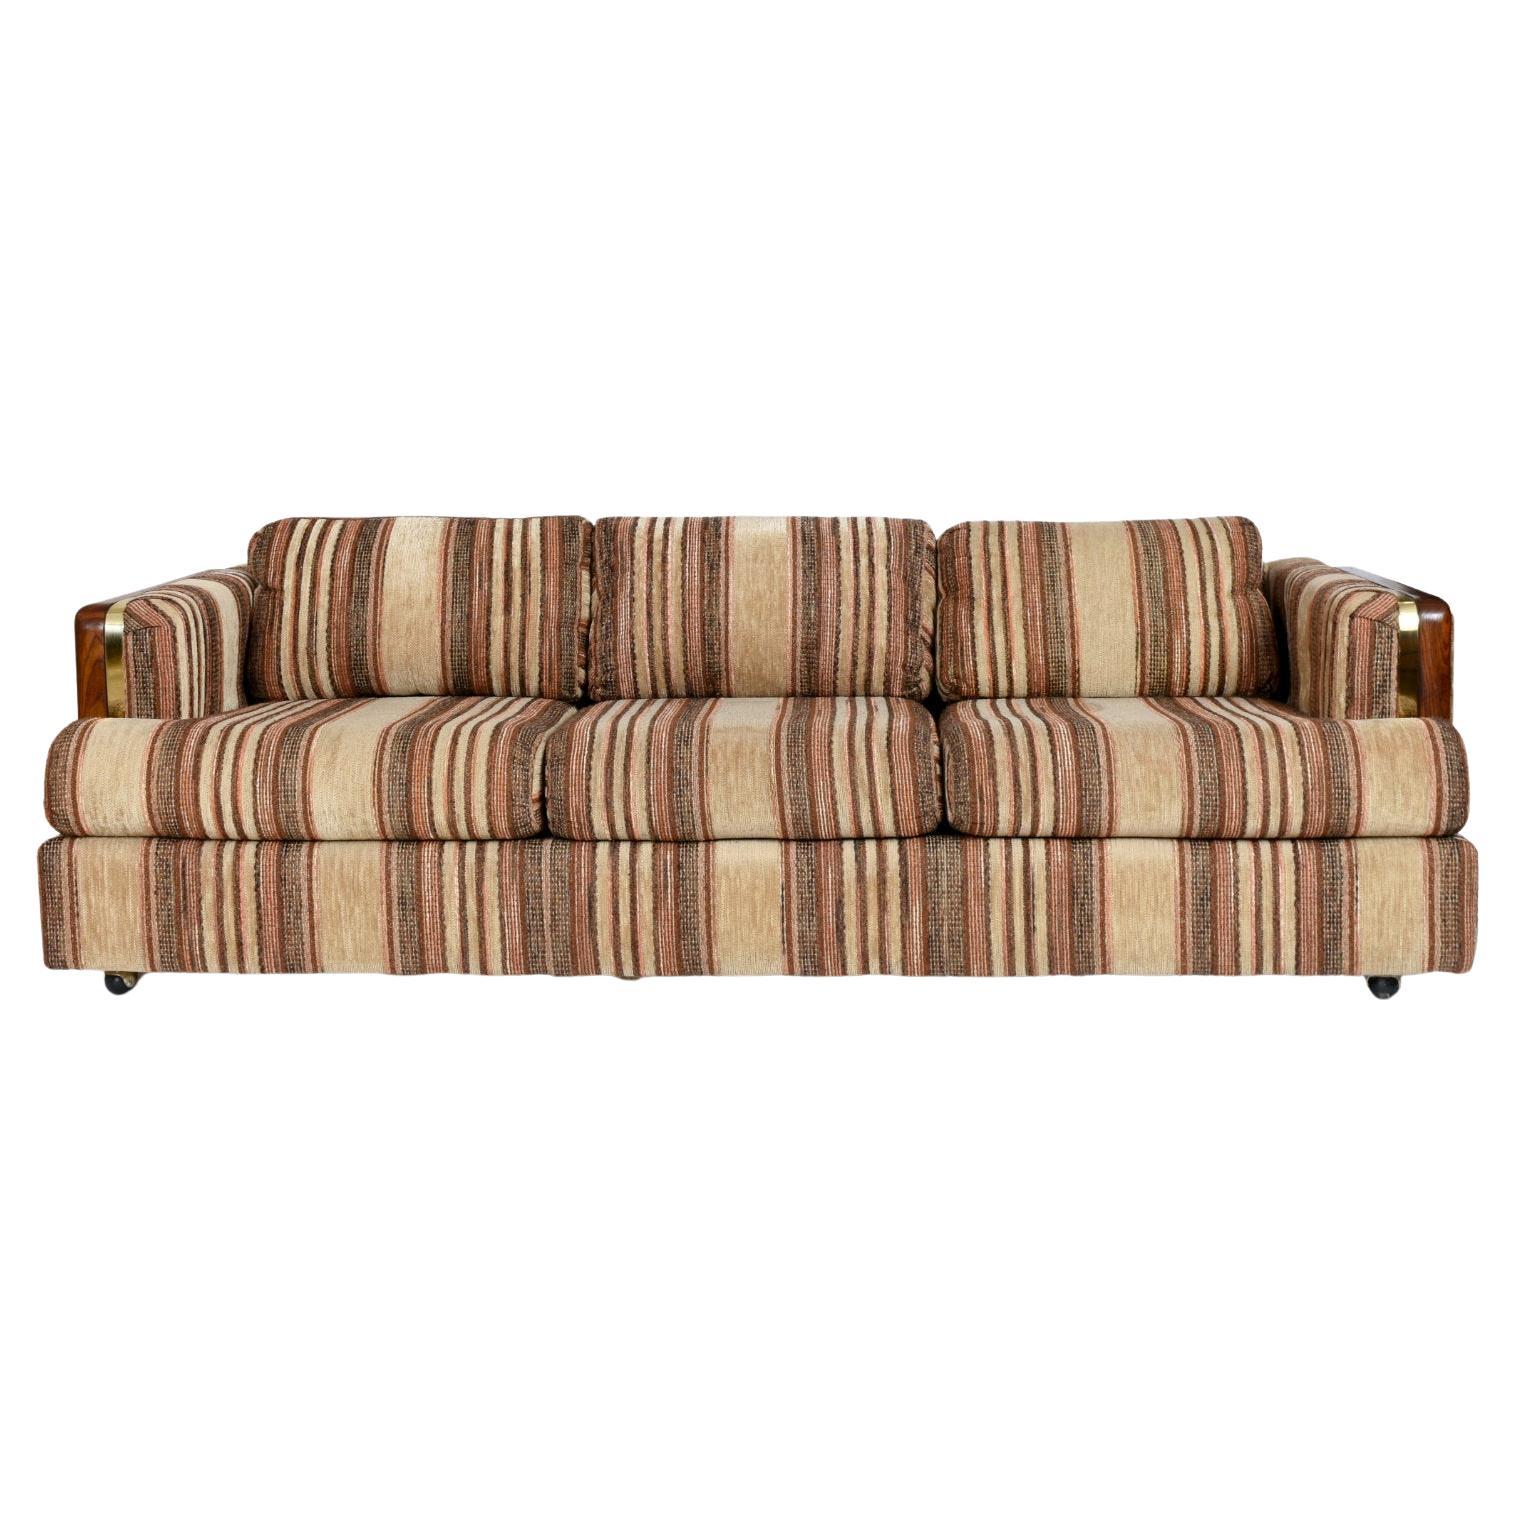 Brown Striped Oak Wood and Brass Accent Tuxedo Sofa